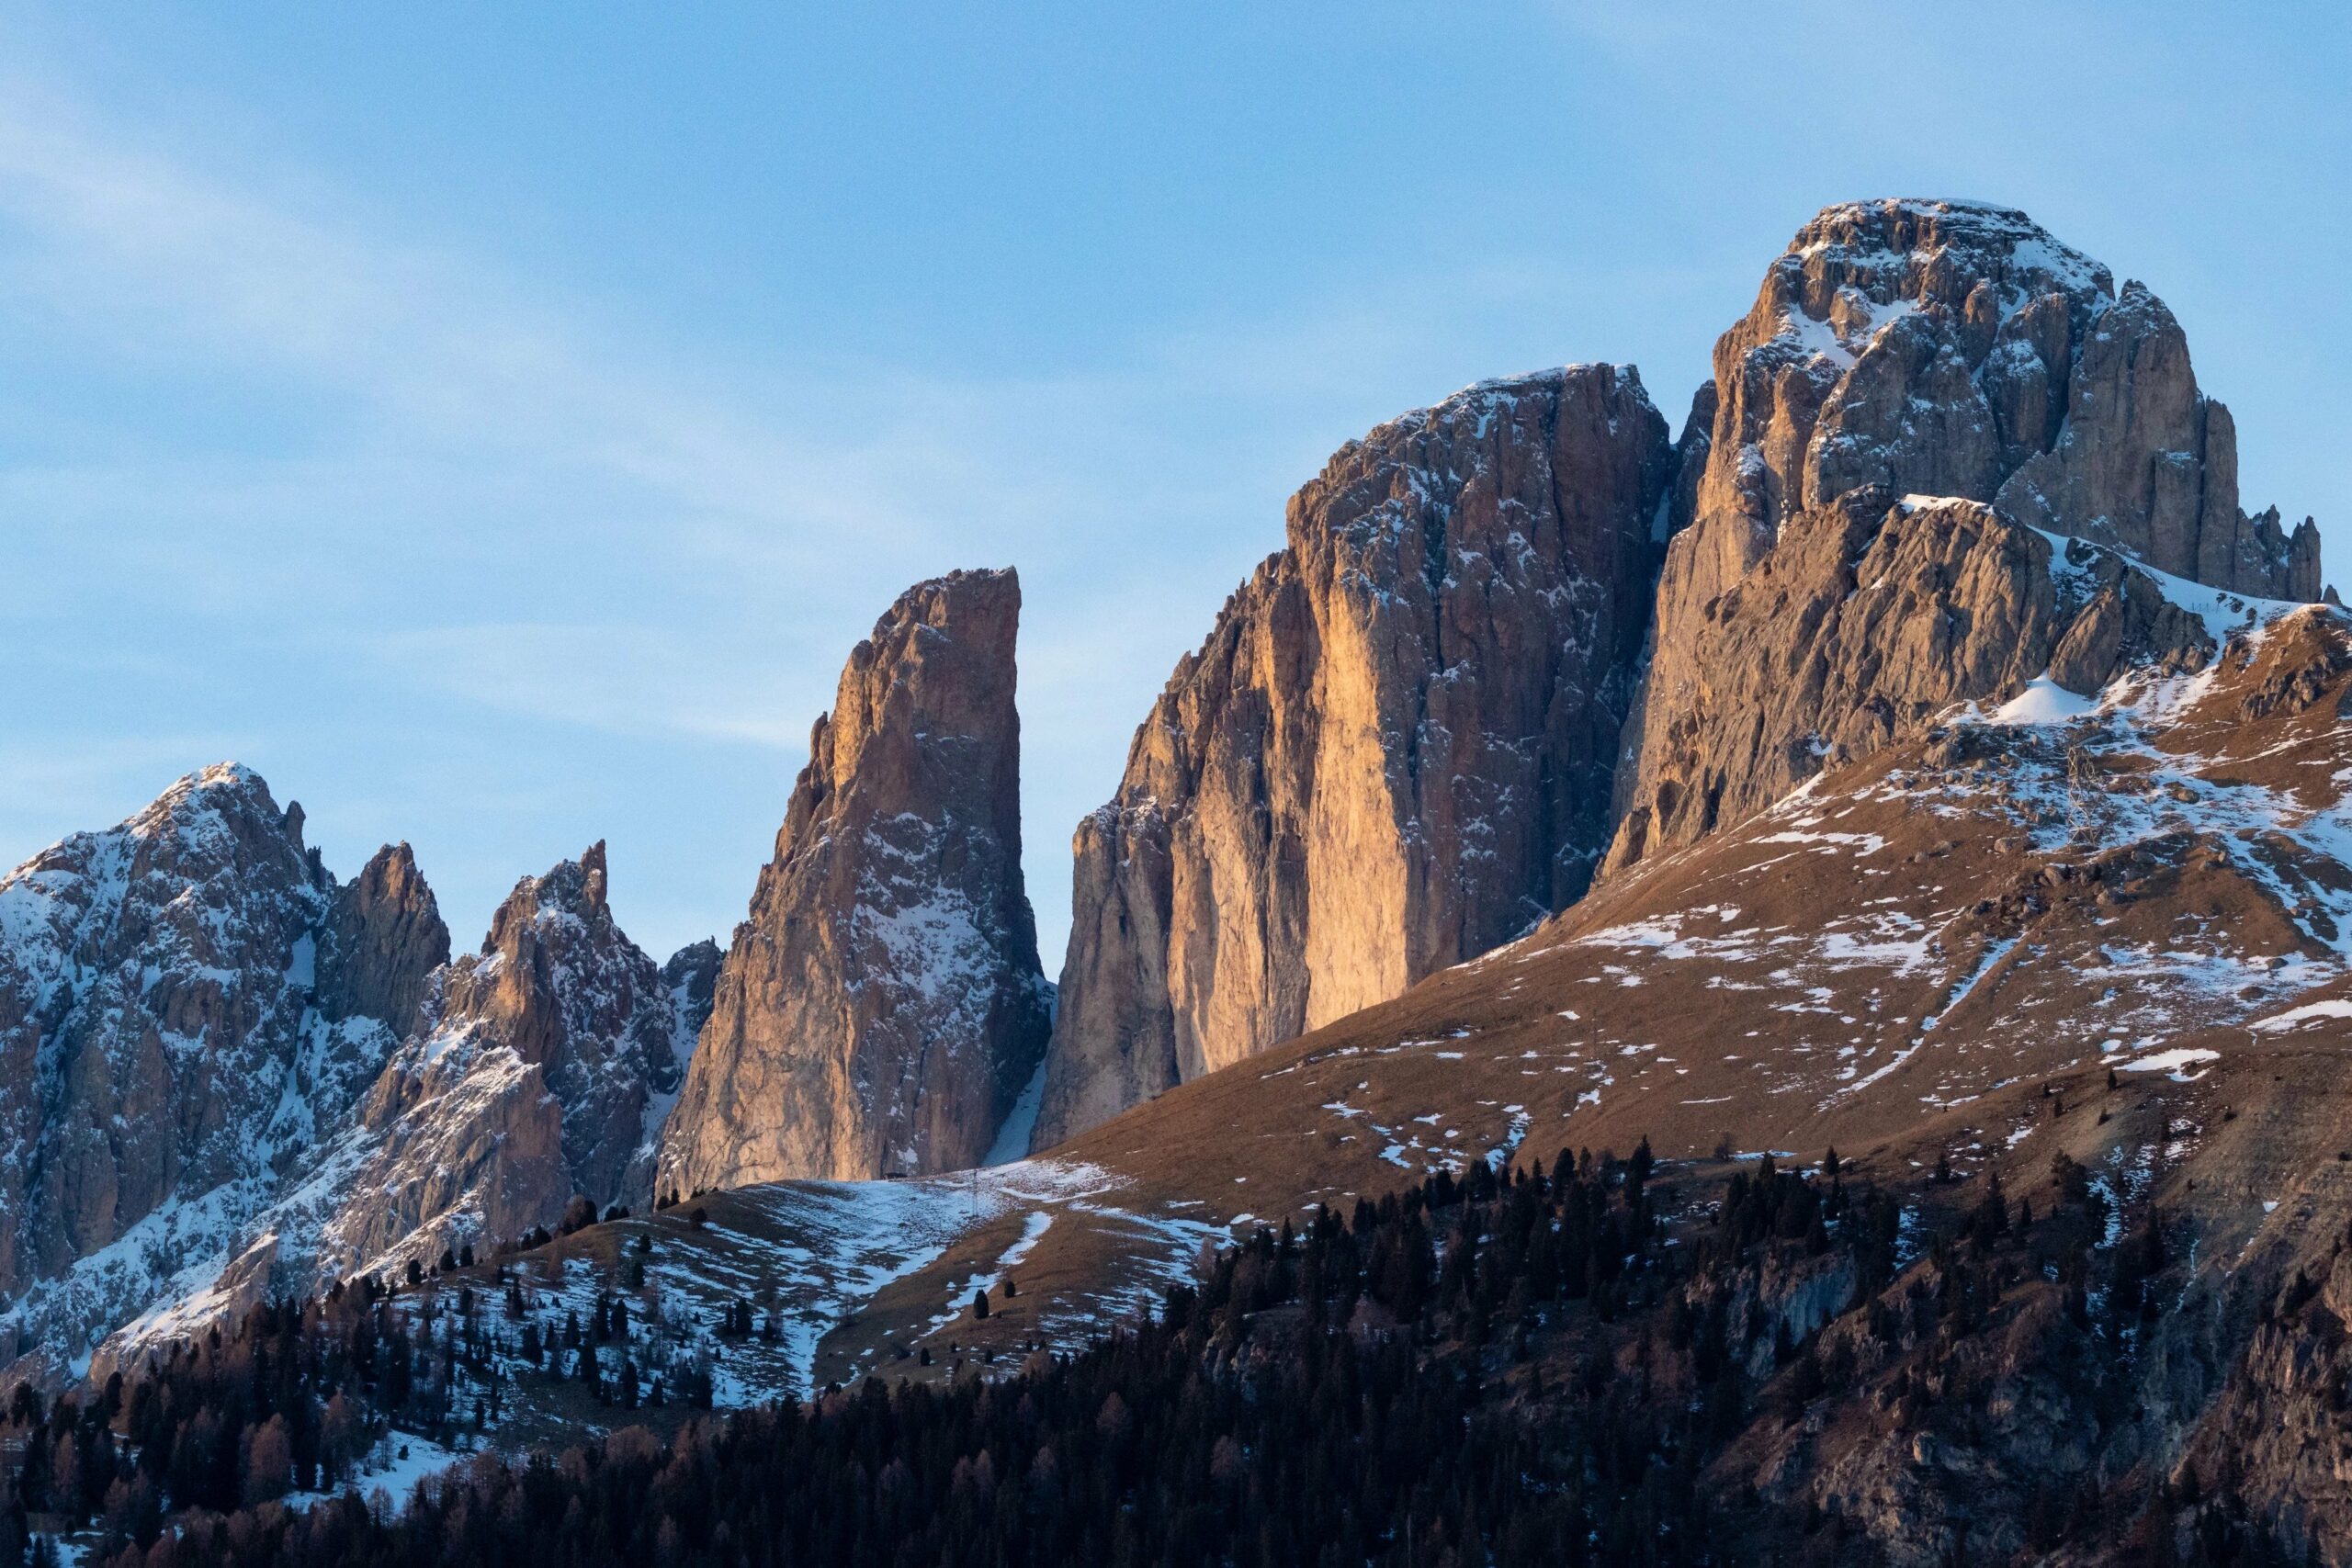 Hiking Hut to Hut with Kids in the Dolomites Plans for 5 Day Trip on Alta Via 1